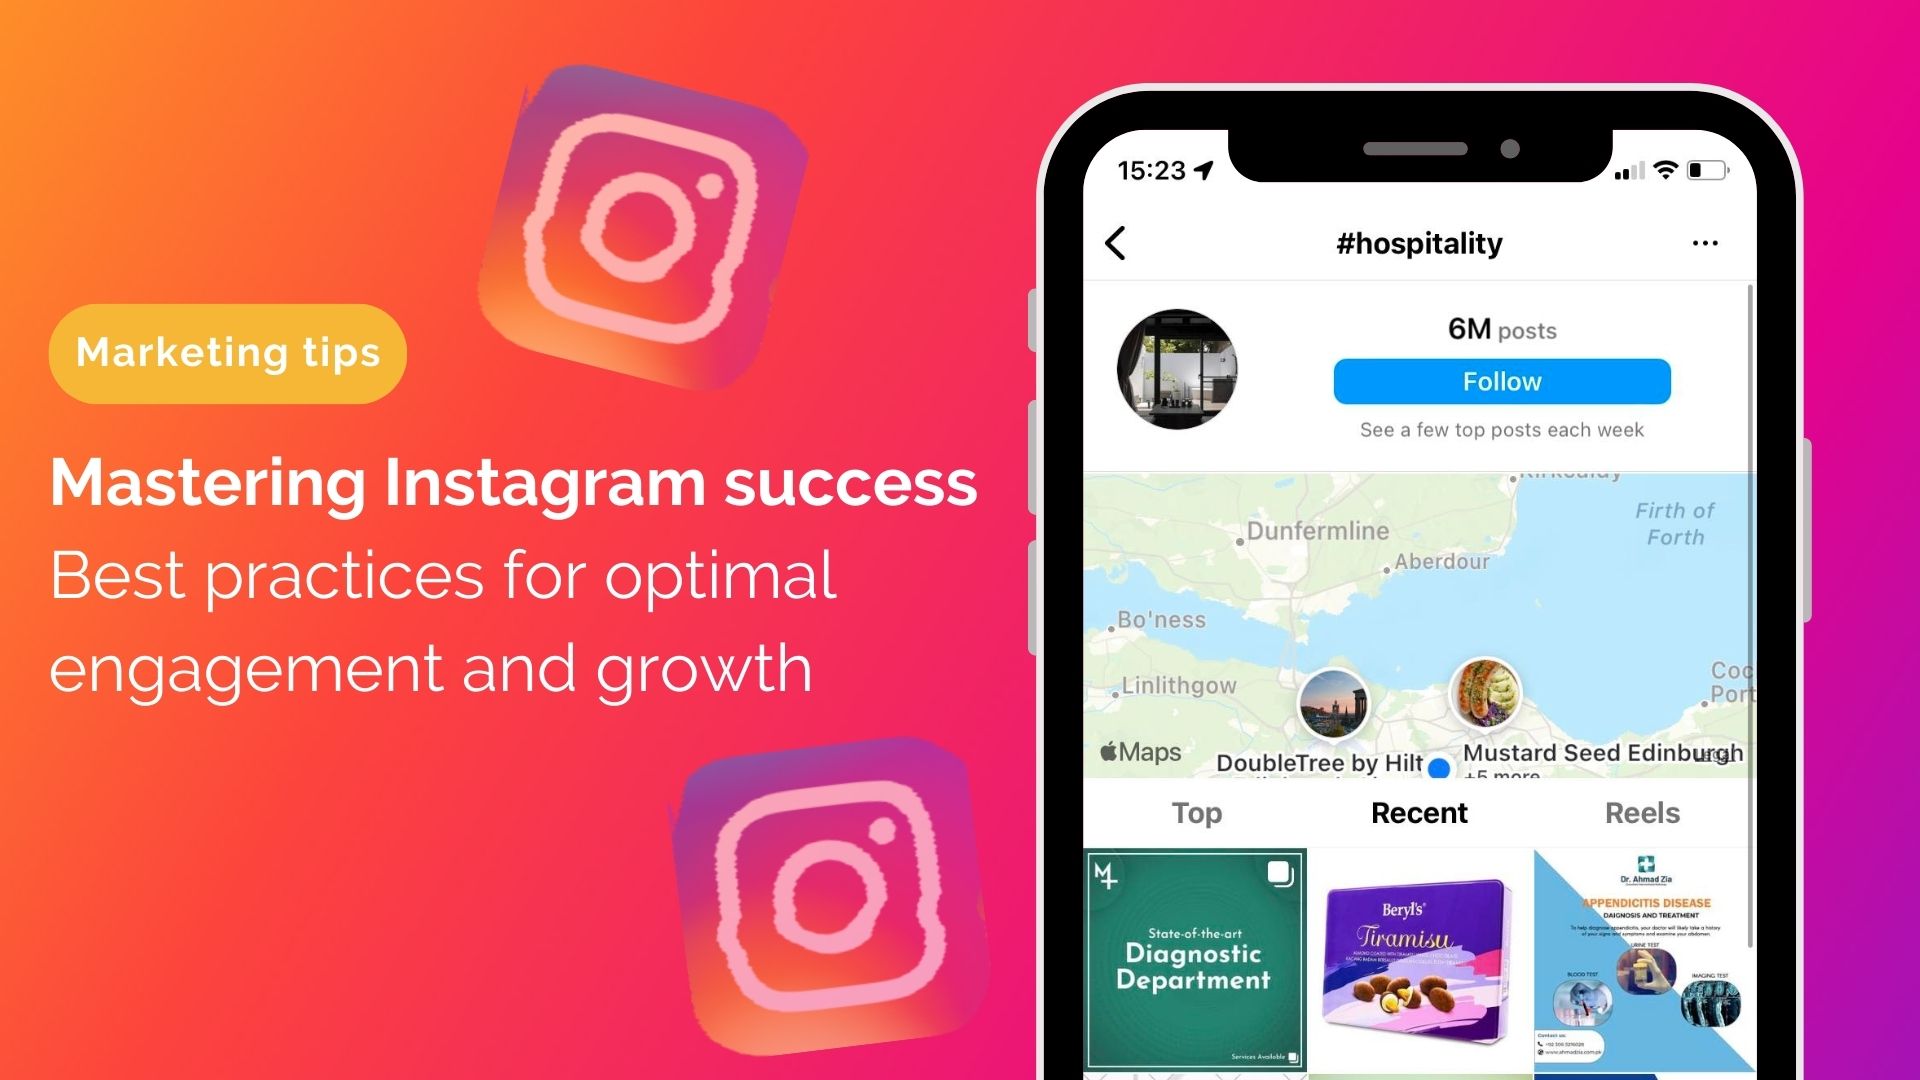 Mastering Instagram success: Best practices for optimal engagement and growth